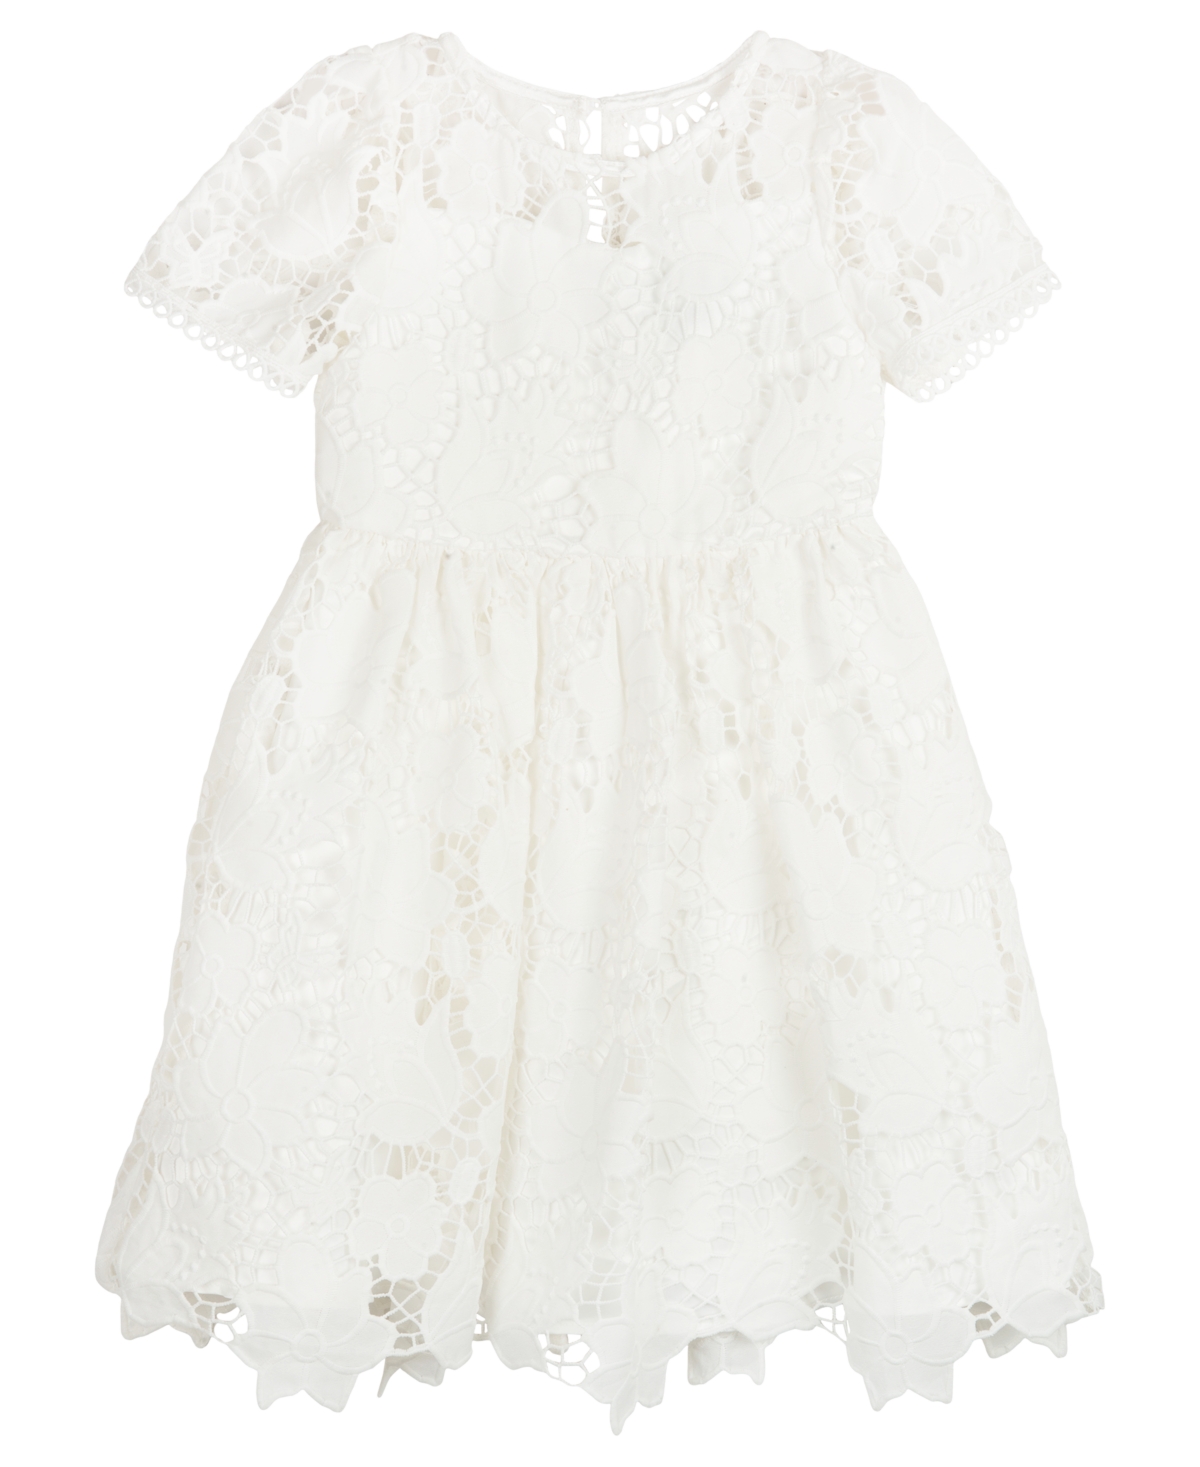 Shop Rare Editions Toddler Girls Illusion Cap Sleeves Burnout Crochet Social Dress In White